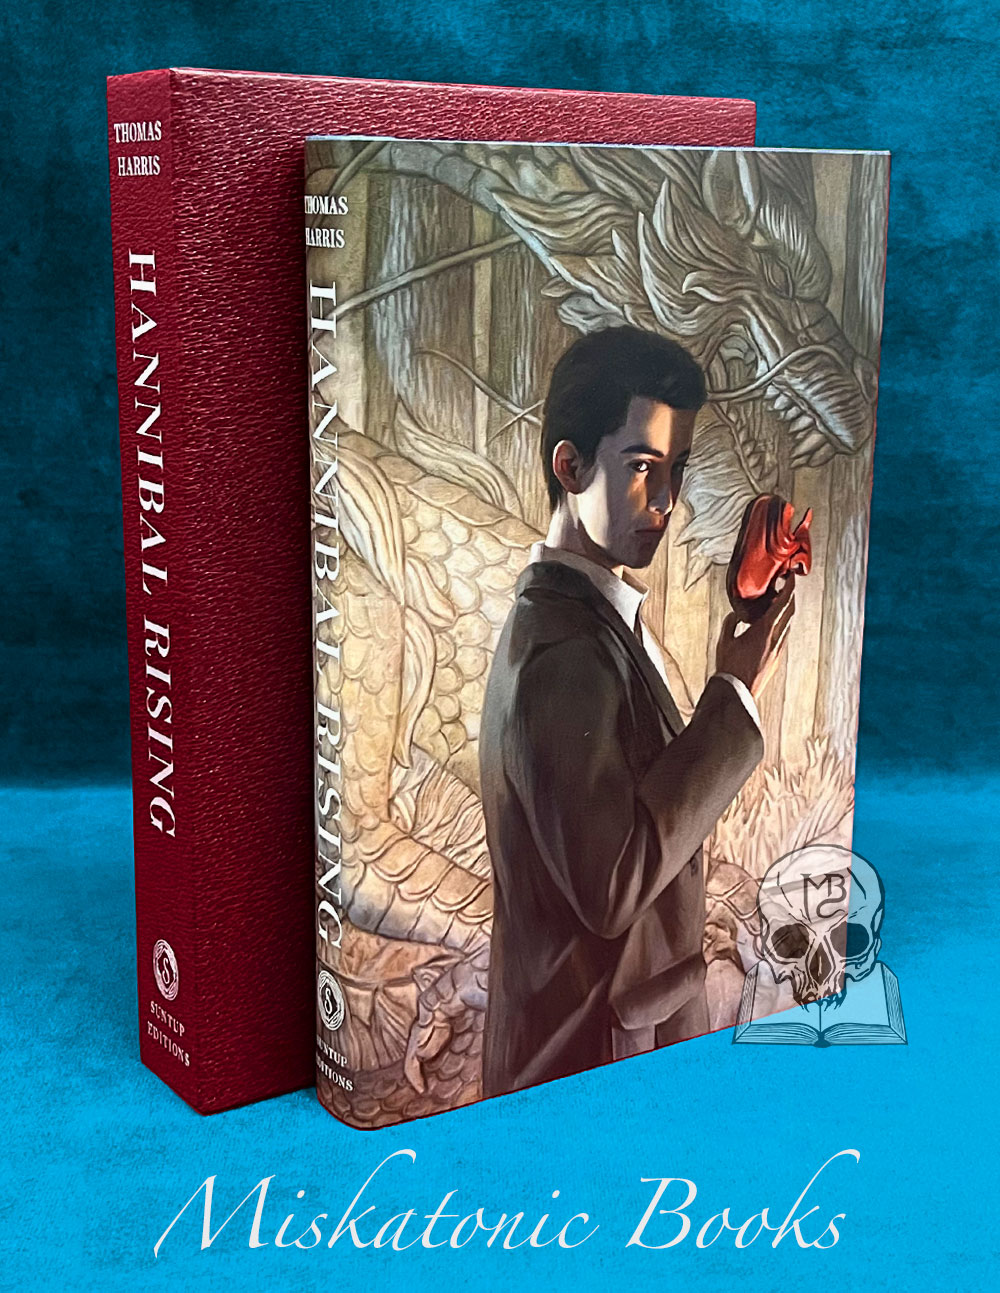 HANNIBAL RISING by Thomas Harris - SIGNED Limited Artist Edition in Custom Slipcase